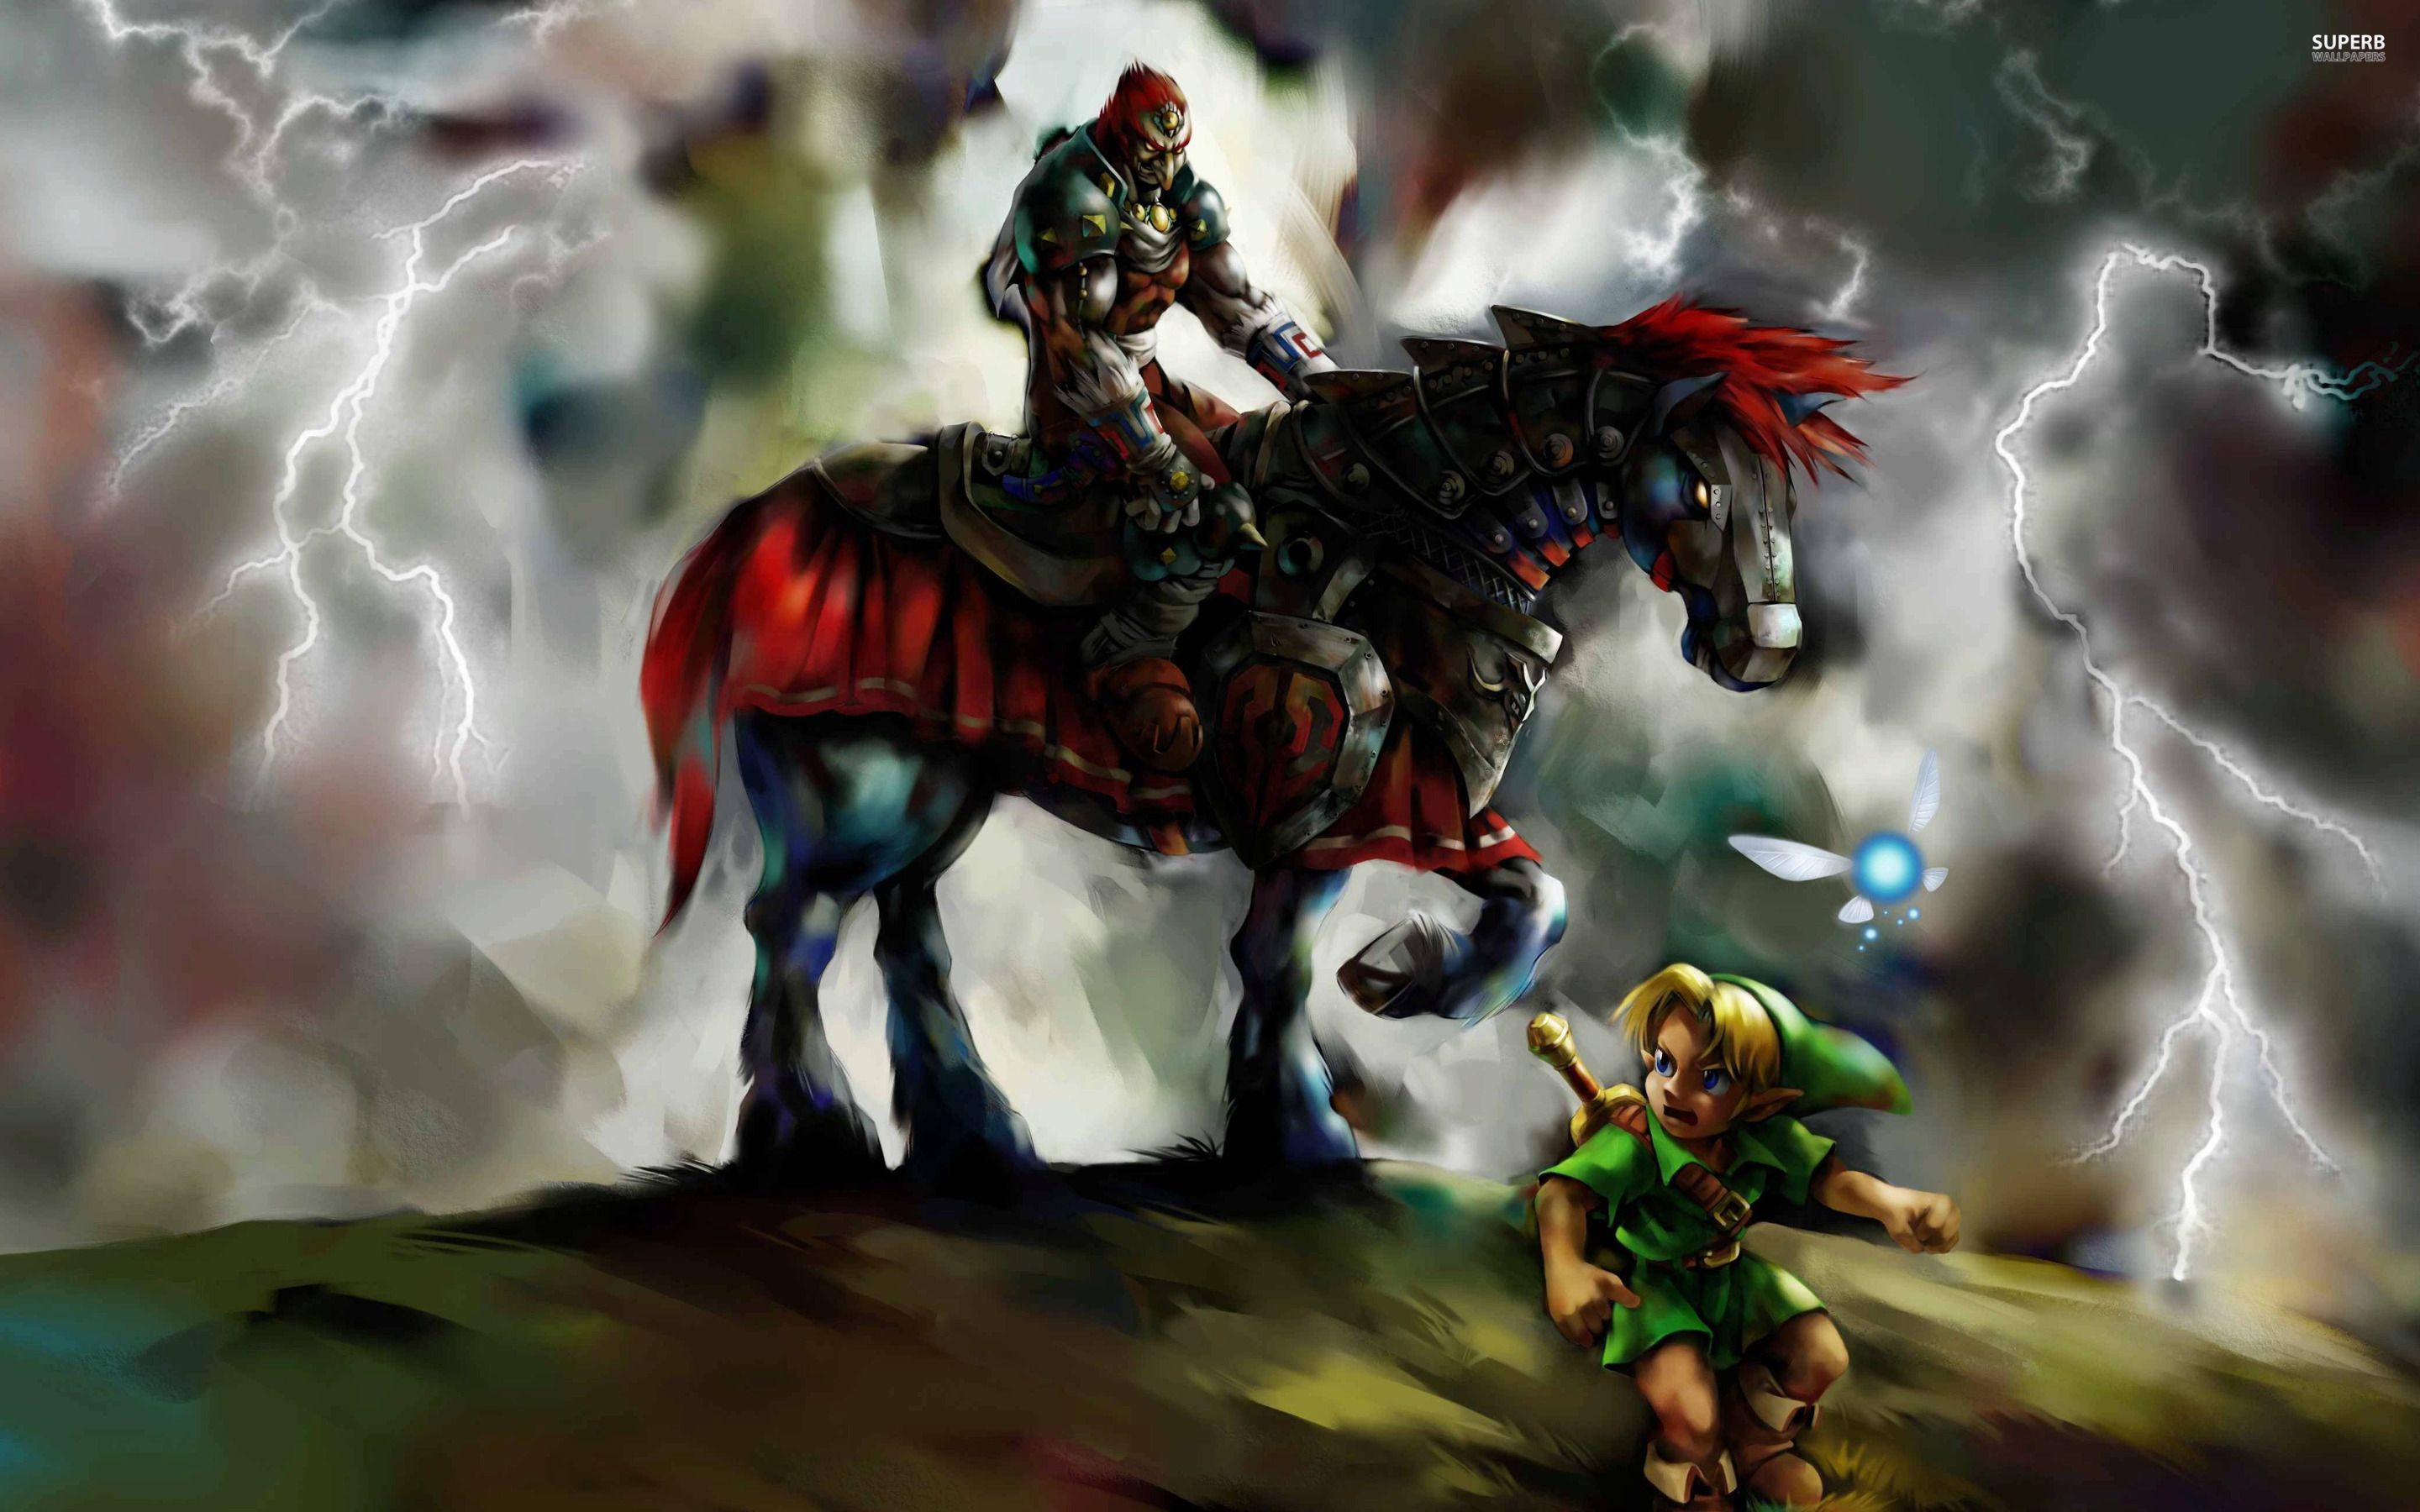 The Legend of Zelda Ocarina of Time wallpaper - Game wallpapers